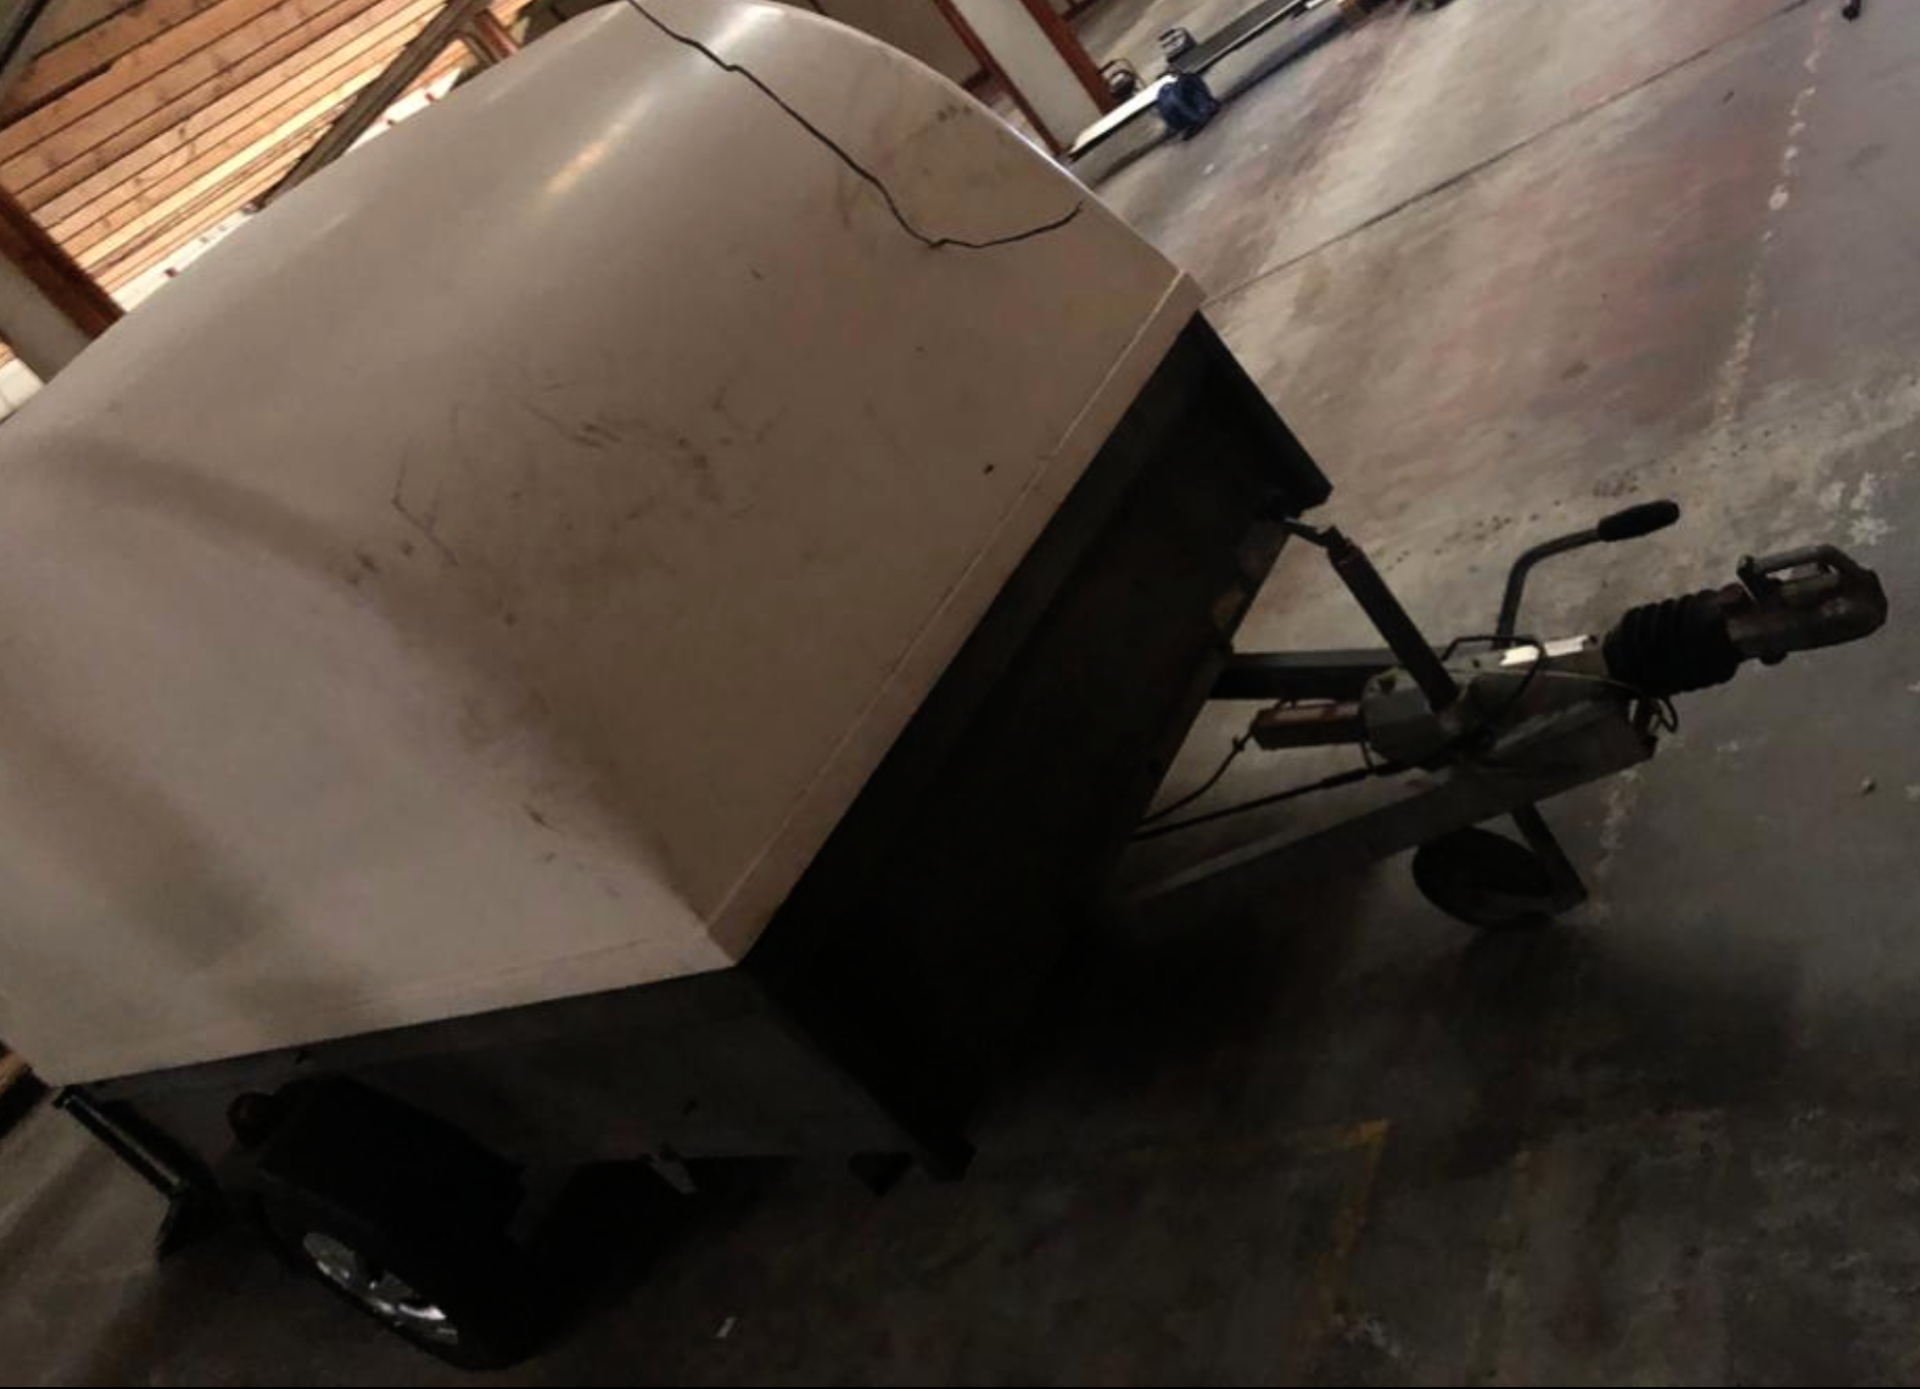 SPECIALIST SINGLE AXLE TOWABLE MOTORBIKE TRANSPORT COVERED TRAILER RAMP *PLUS VAT* - £1500 RESERVE! - Image 2 of 8